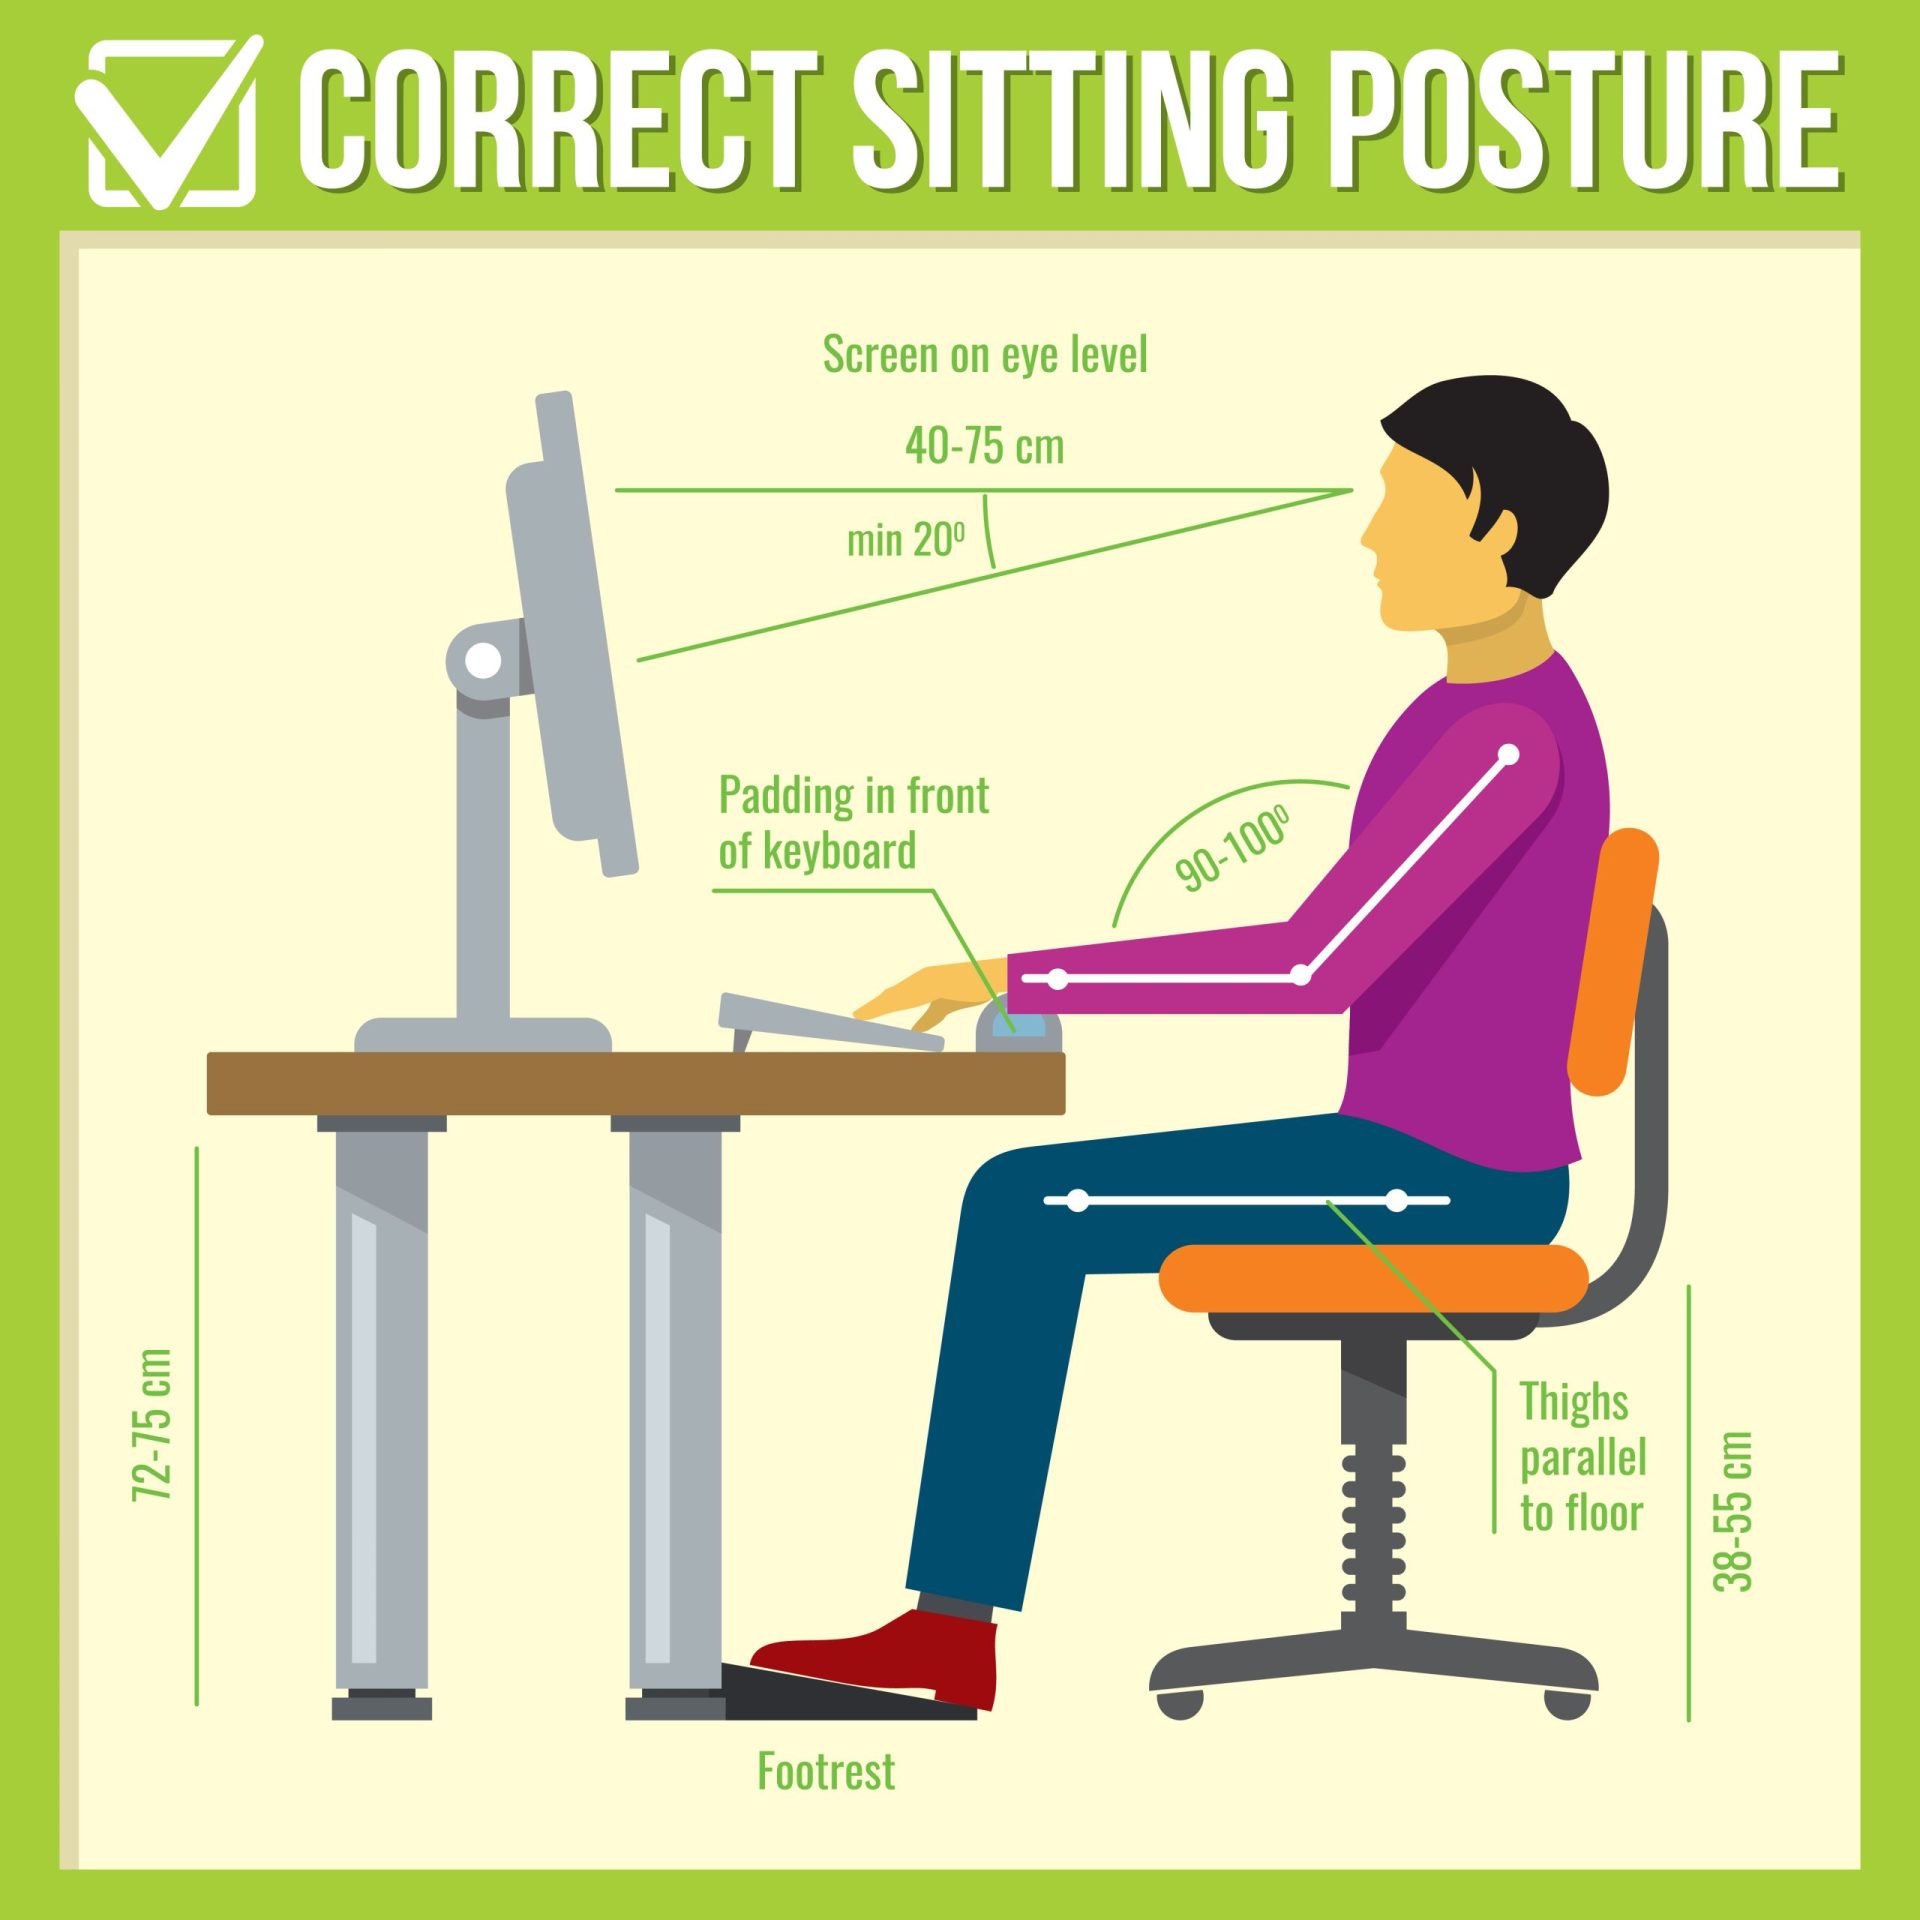 Does Sitting Make Your Hips Wider?